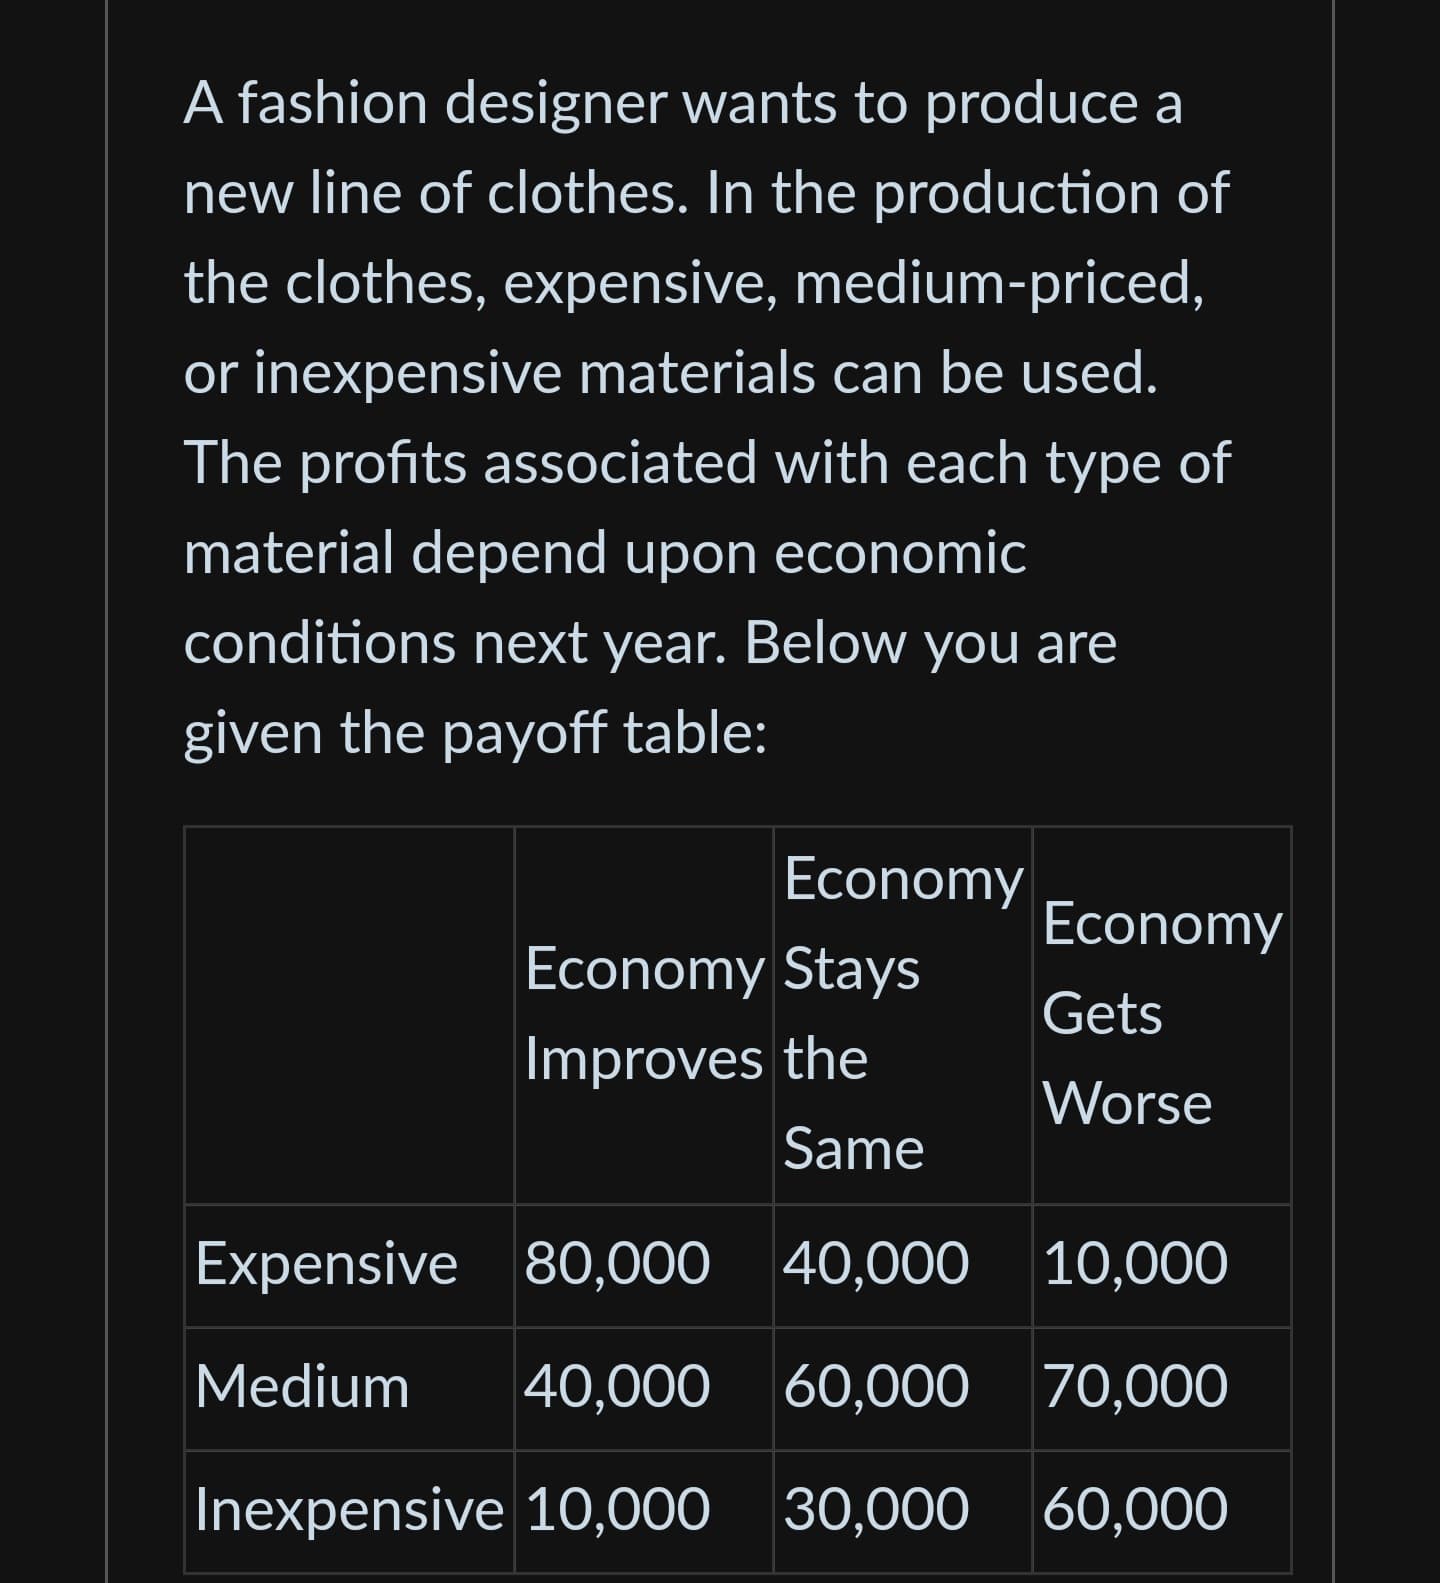 A fashion designer wants to produce a
new line of clothes. In the production of
the clothes, expensive, medium-priced,
or inexpensive materials can be used.
The profits associated with each type of
material depend upon economic
conditions next year. Below you are
given the payoff table:
Economy
Economy Stays
Improves the
Economy
Gets
Worse
Same
Expensive 80,000 40,000 10,000
Medium 40,000 60,000 70,000
Inexpensive 10,000 30,000 60,000